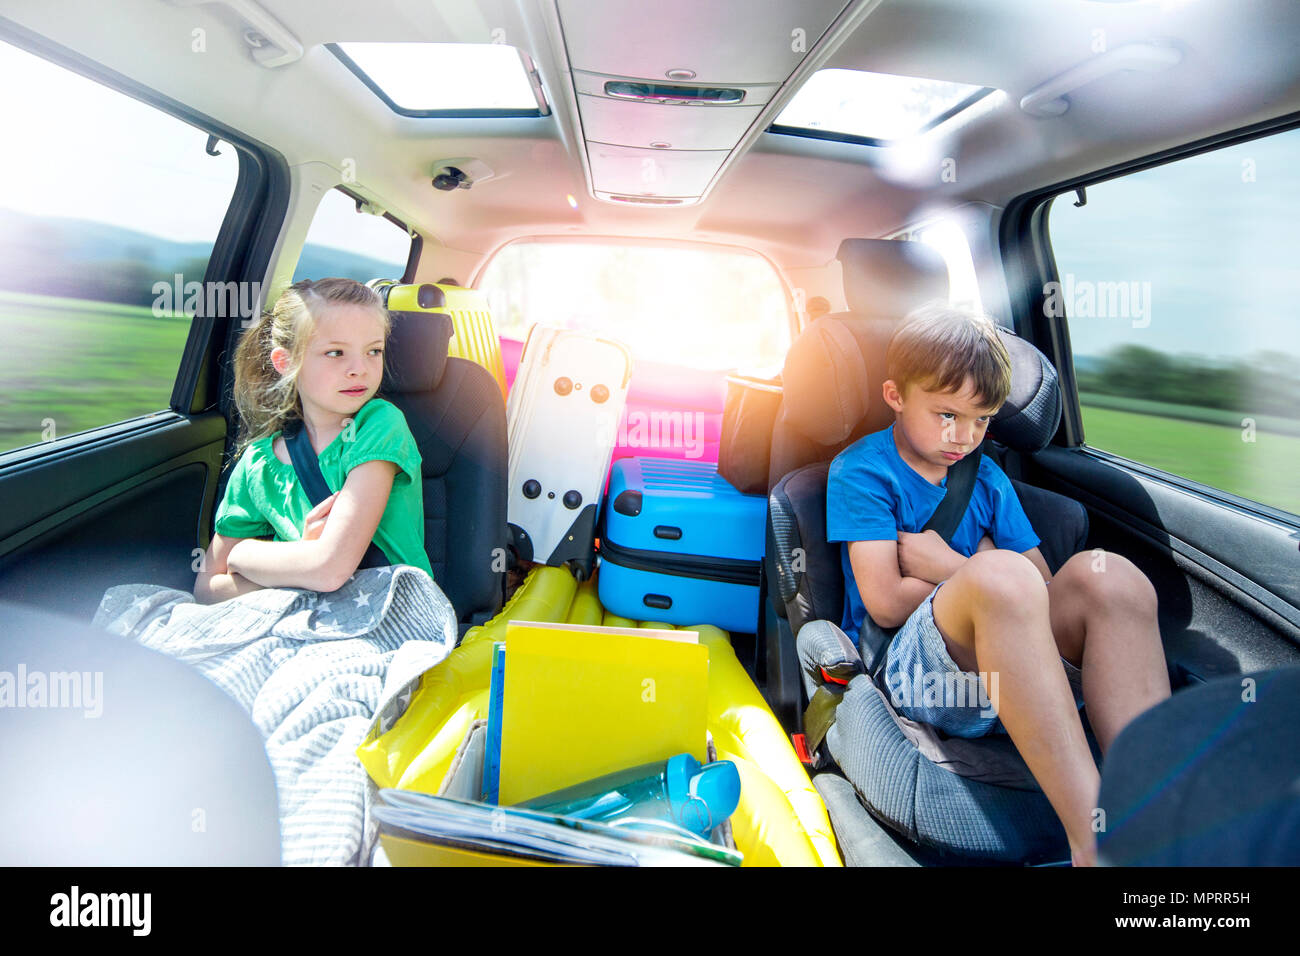 Have a long car journey. Shutterstock exhausted child sitting in the car on a long Journey. Siblings Holiday. Longing my car.